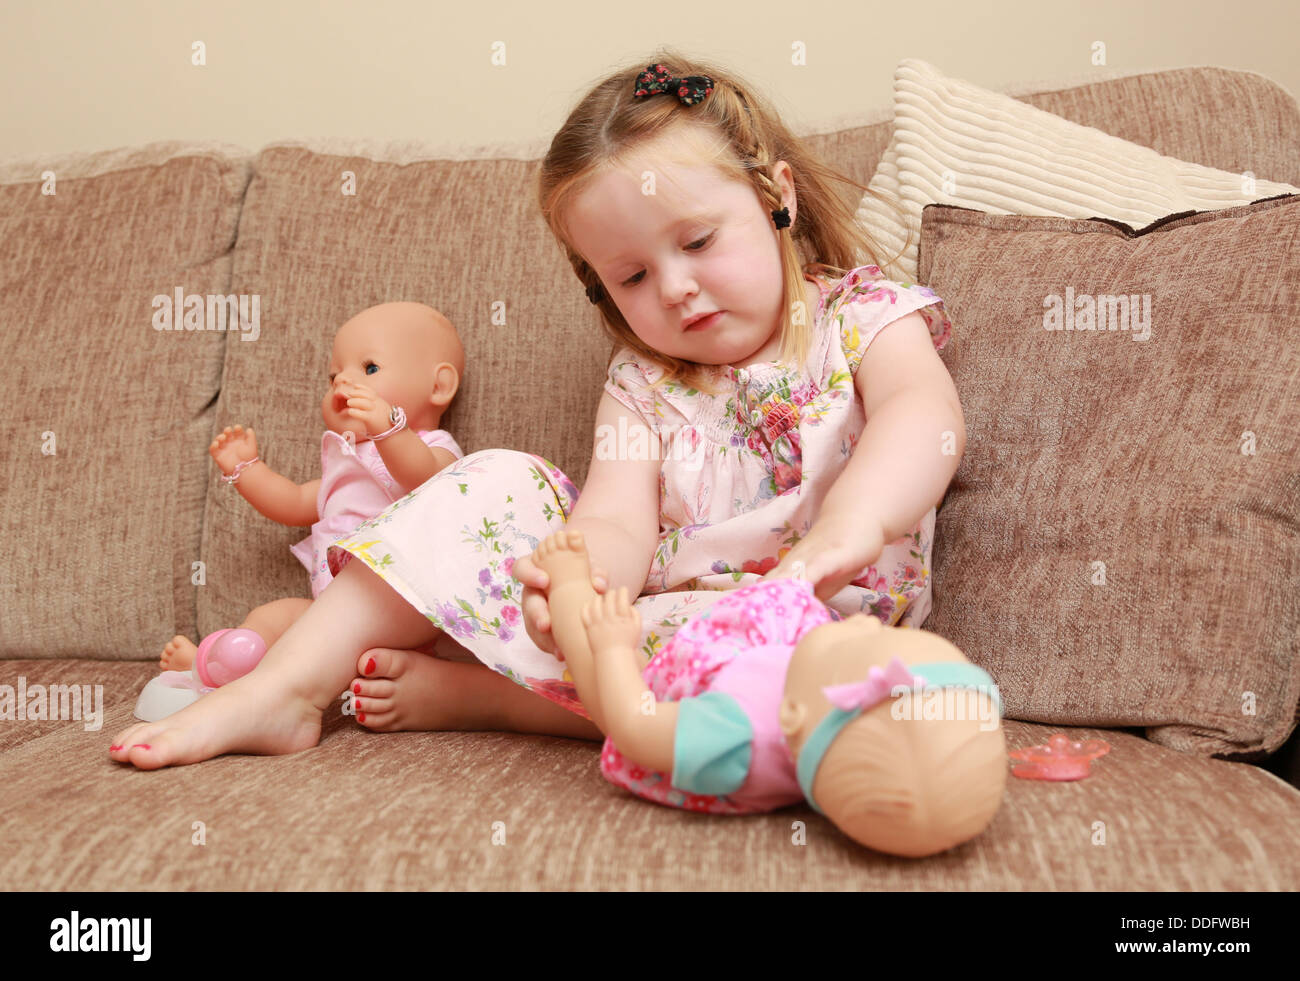 Little girl playing with dolls Stock Photo